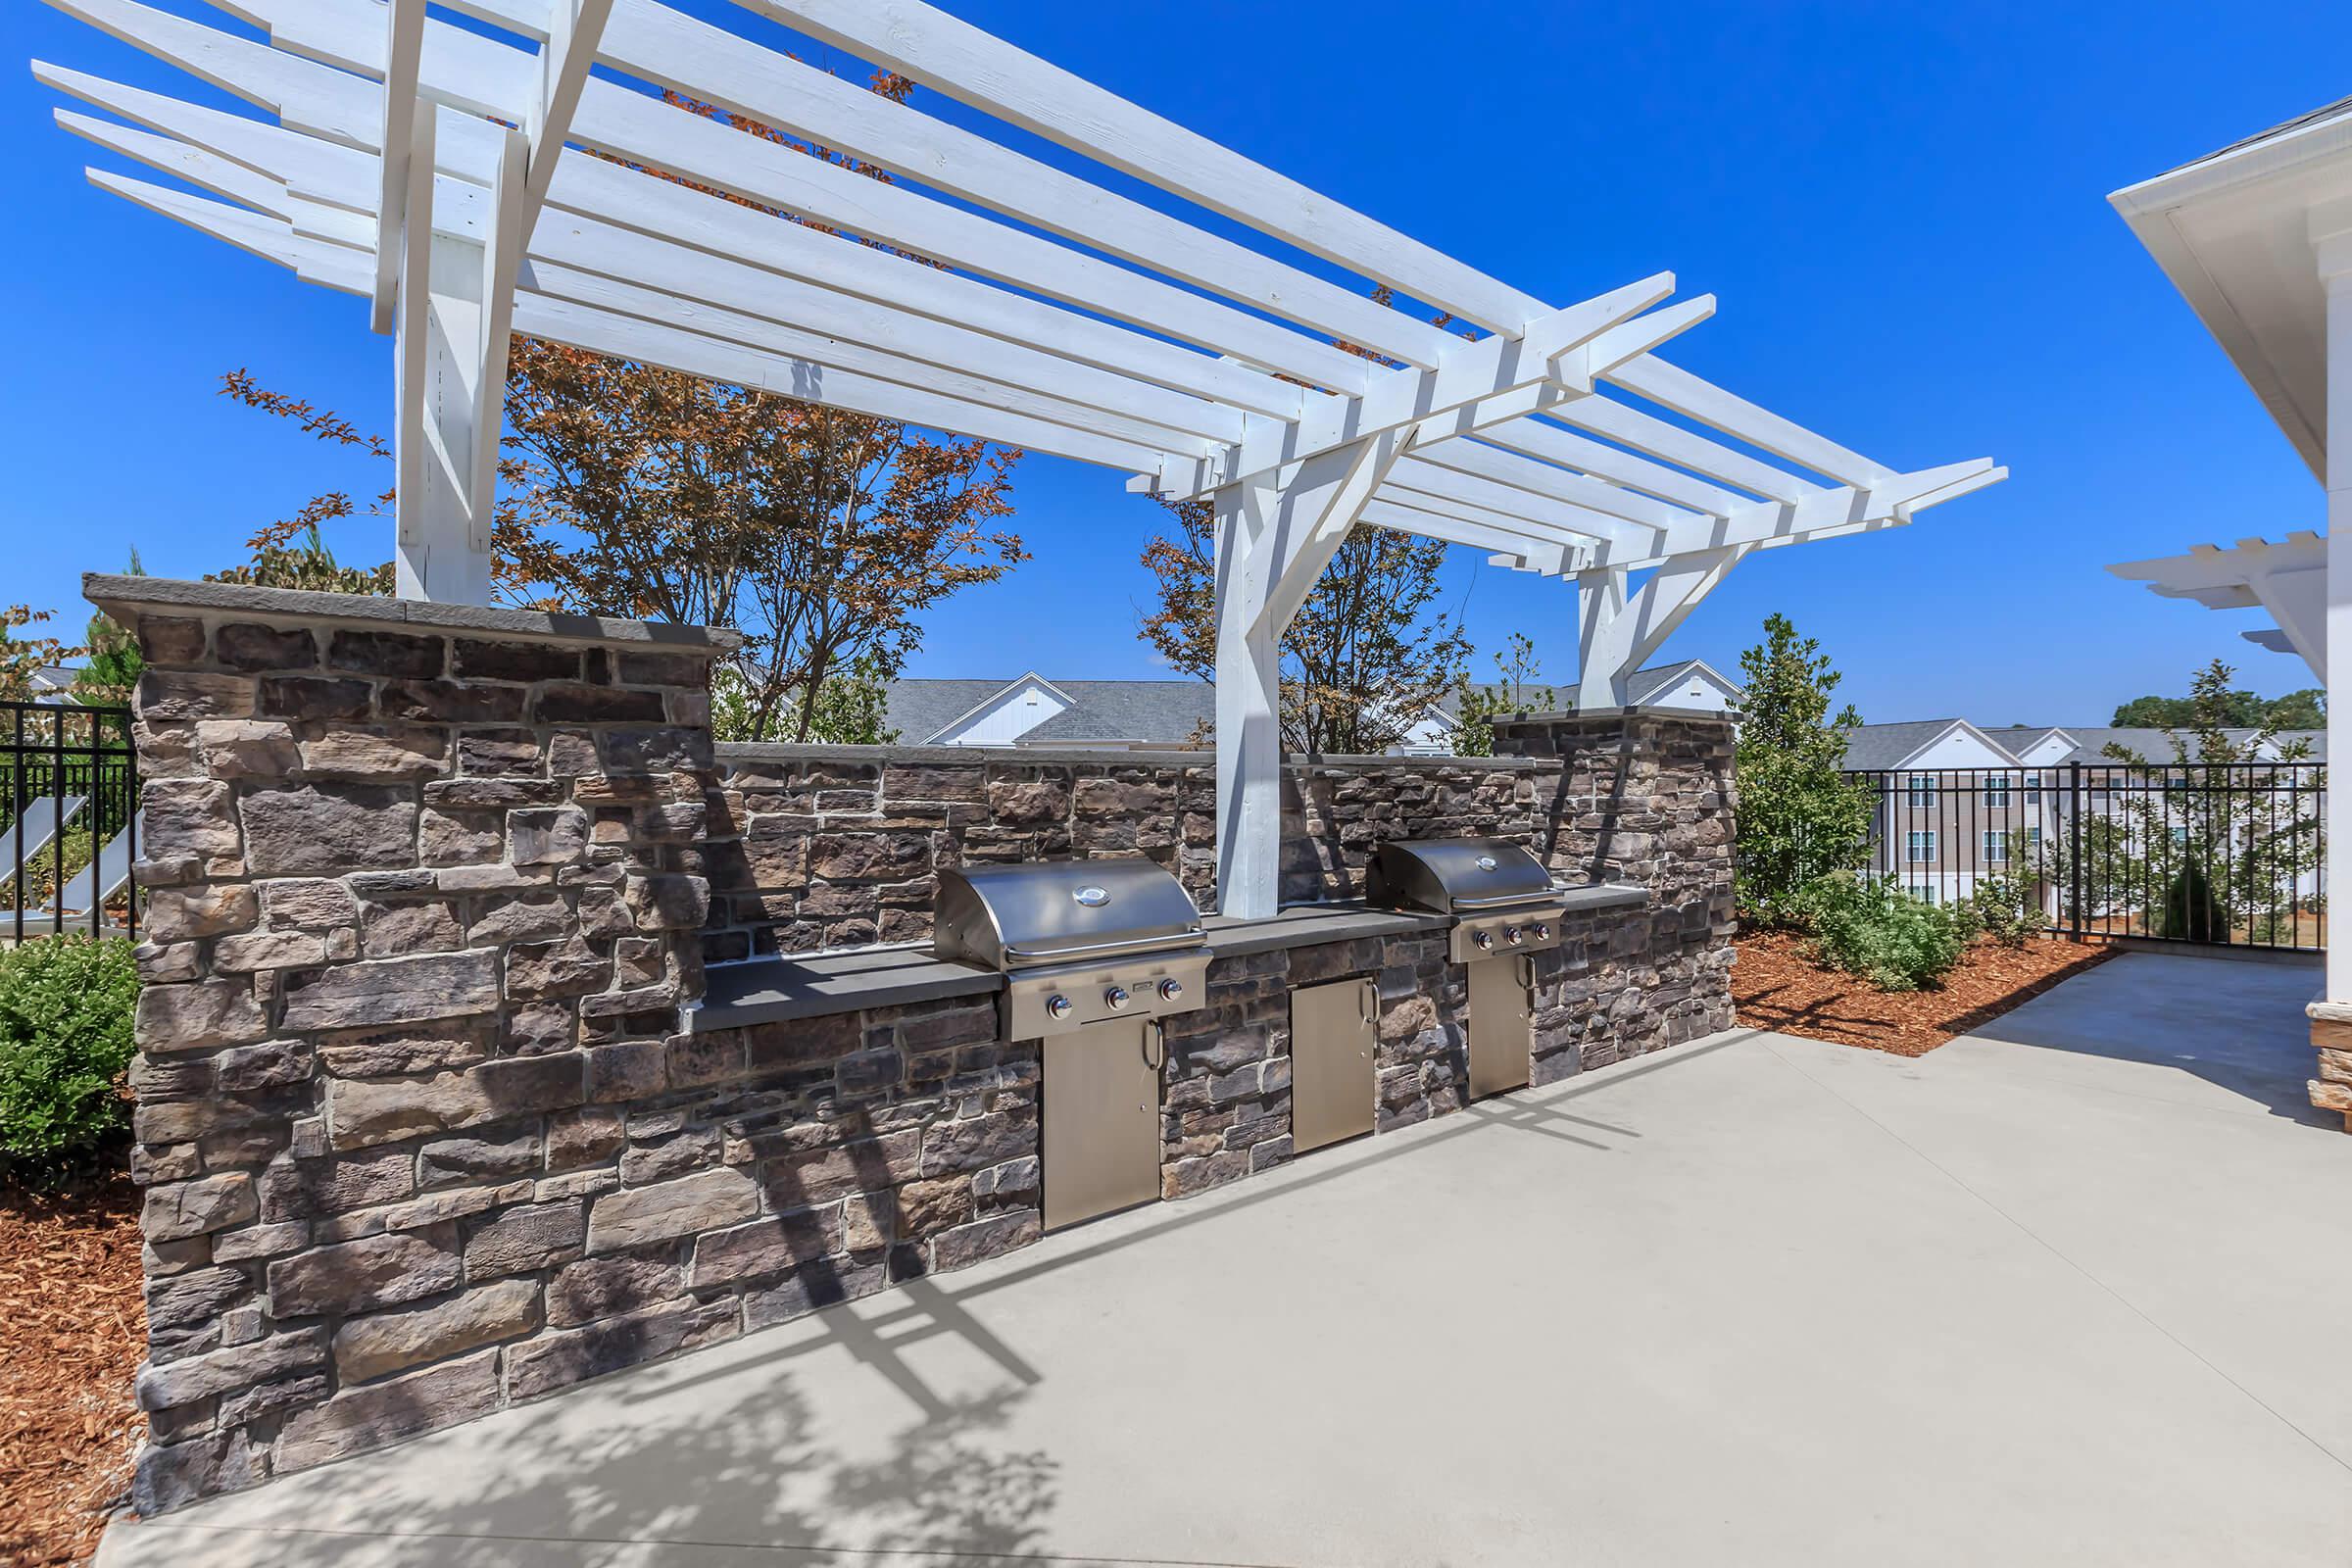 Enjoy A Barbecue with Friends At Riverstone Apartments At Long Shoals In Arden, NC 